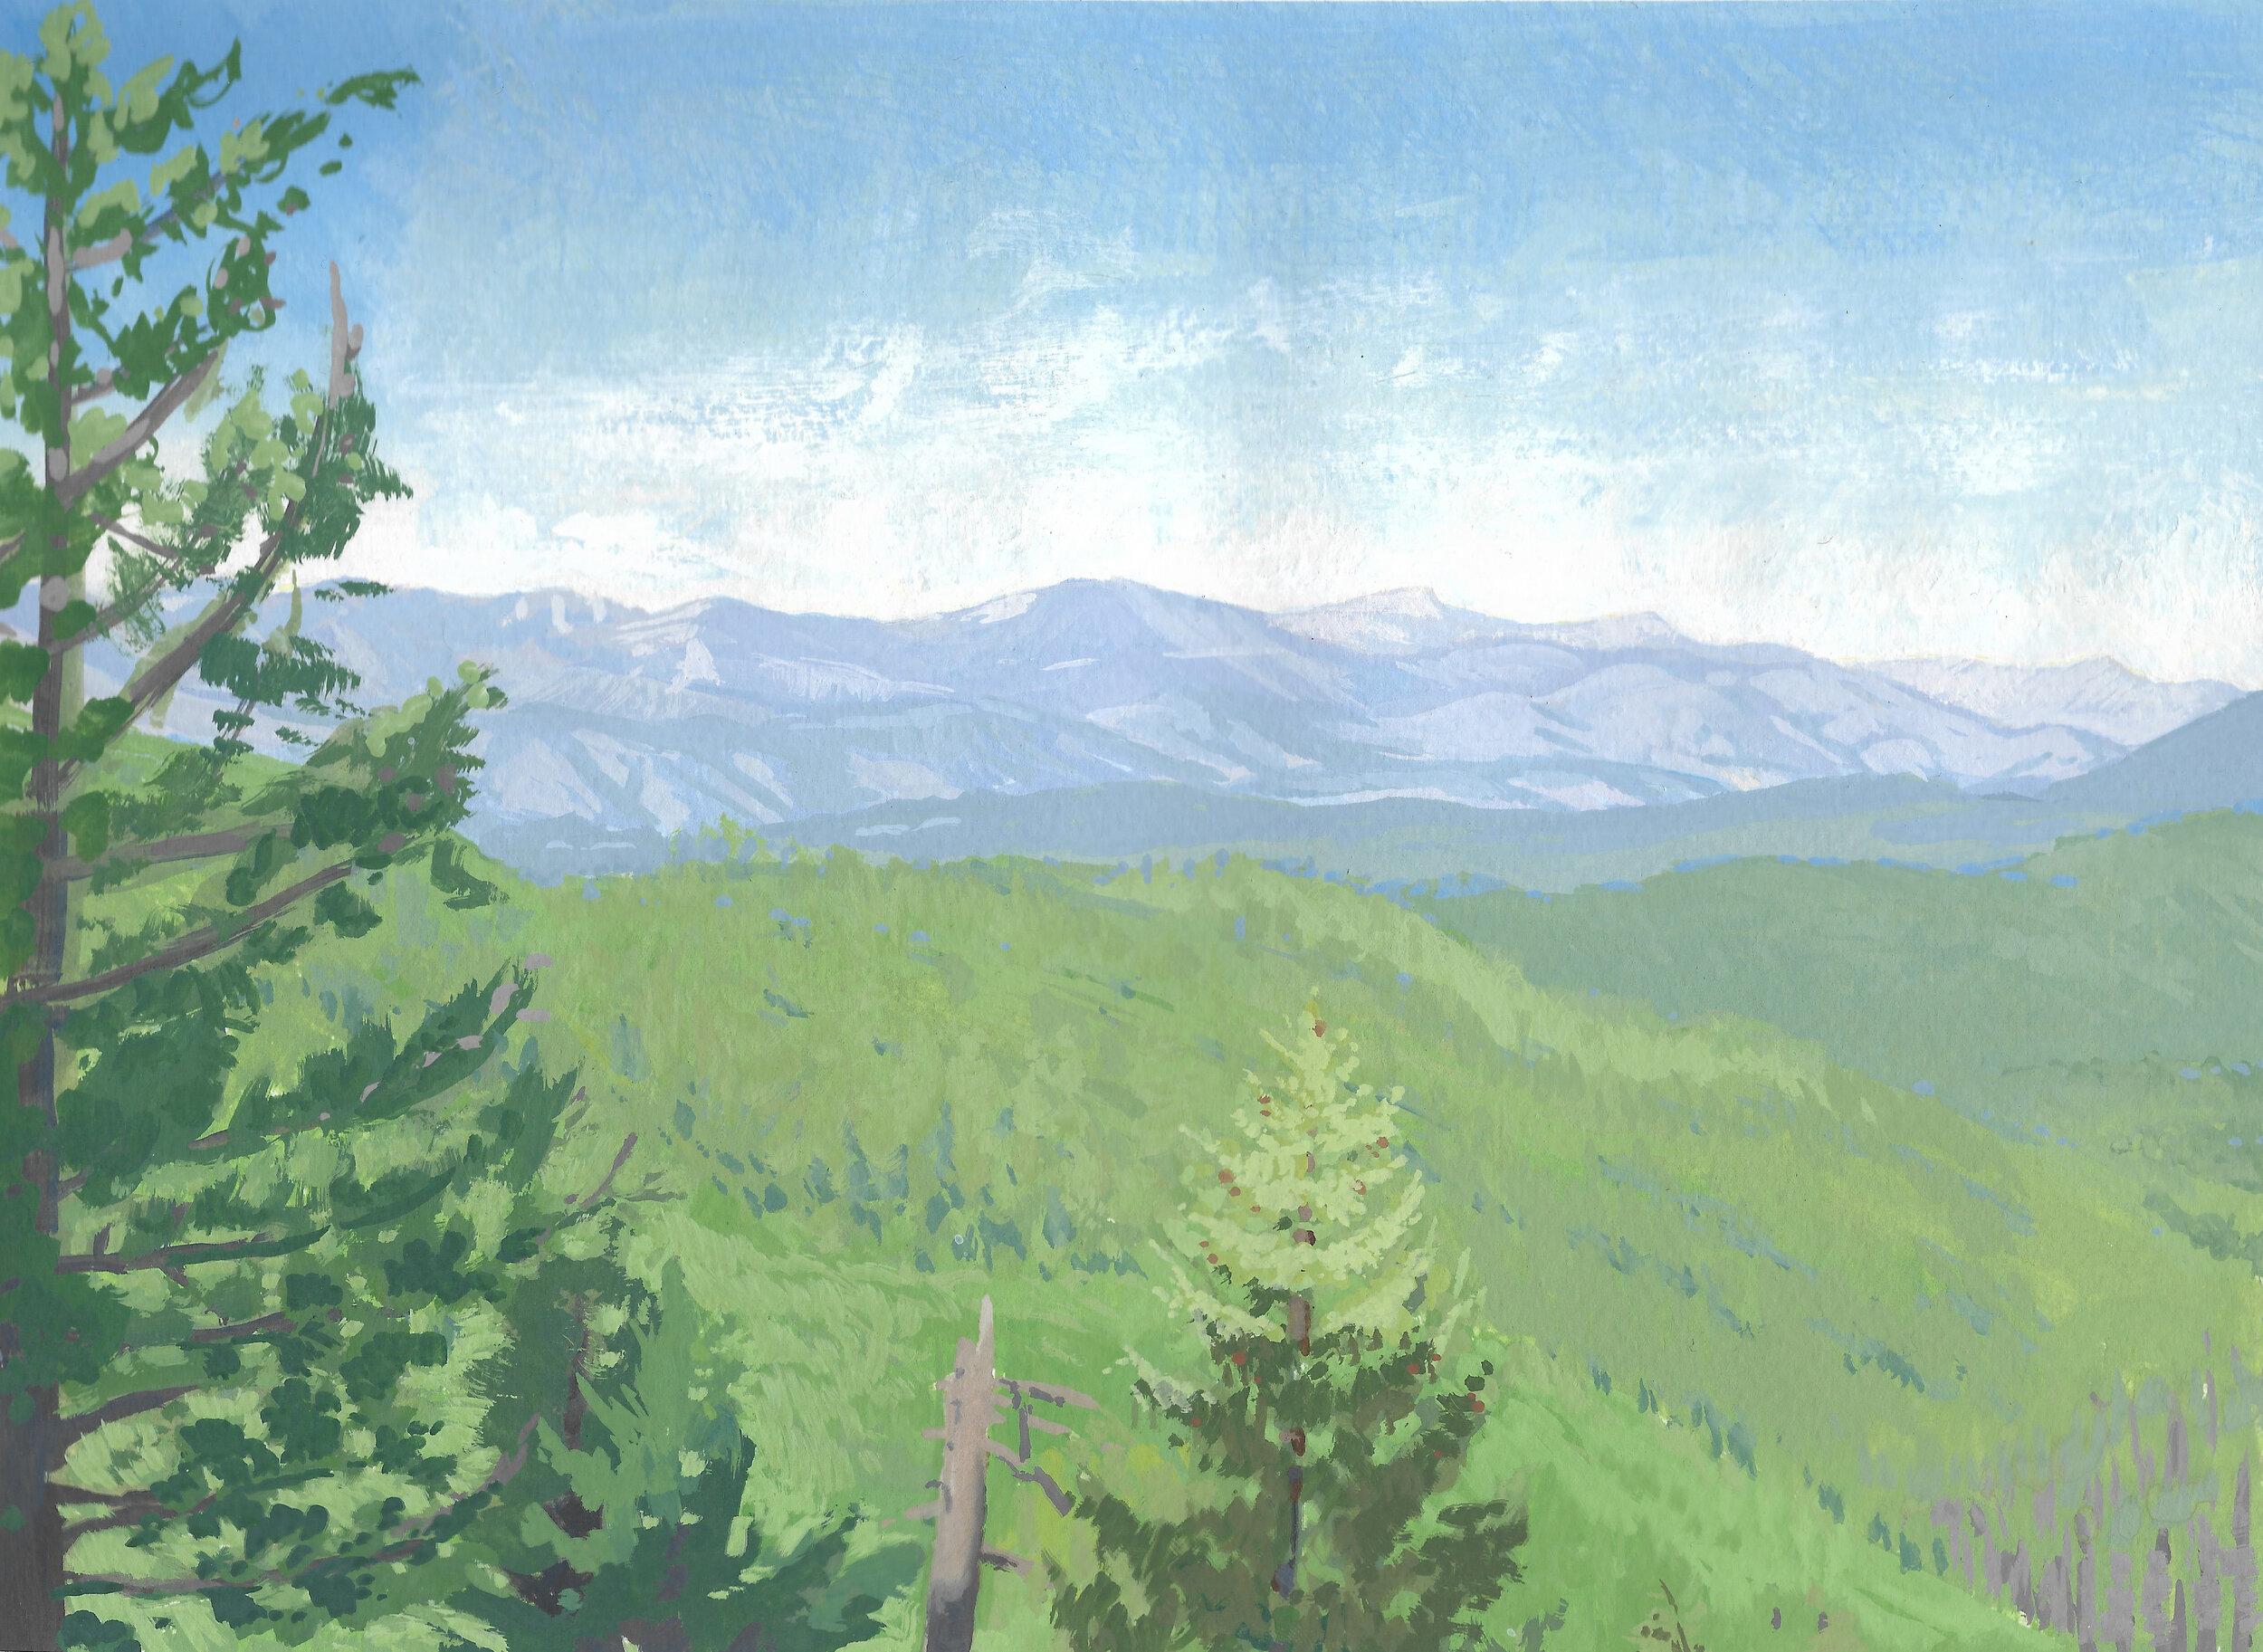  Siskiyou Mountain Morning (2019)  9” x 12” — gouache on paper  Available for purchase. 